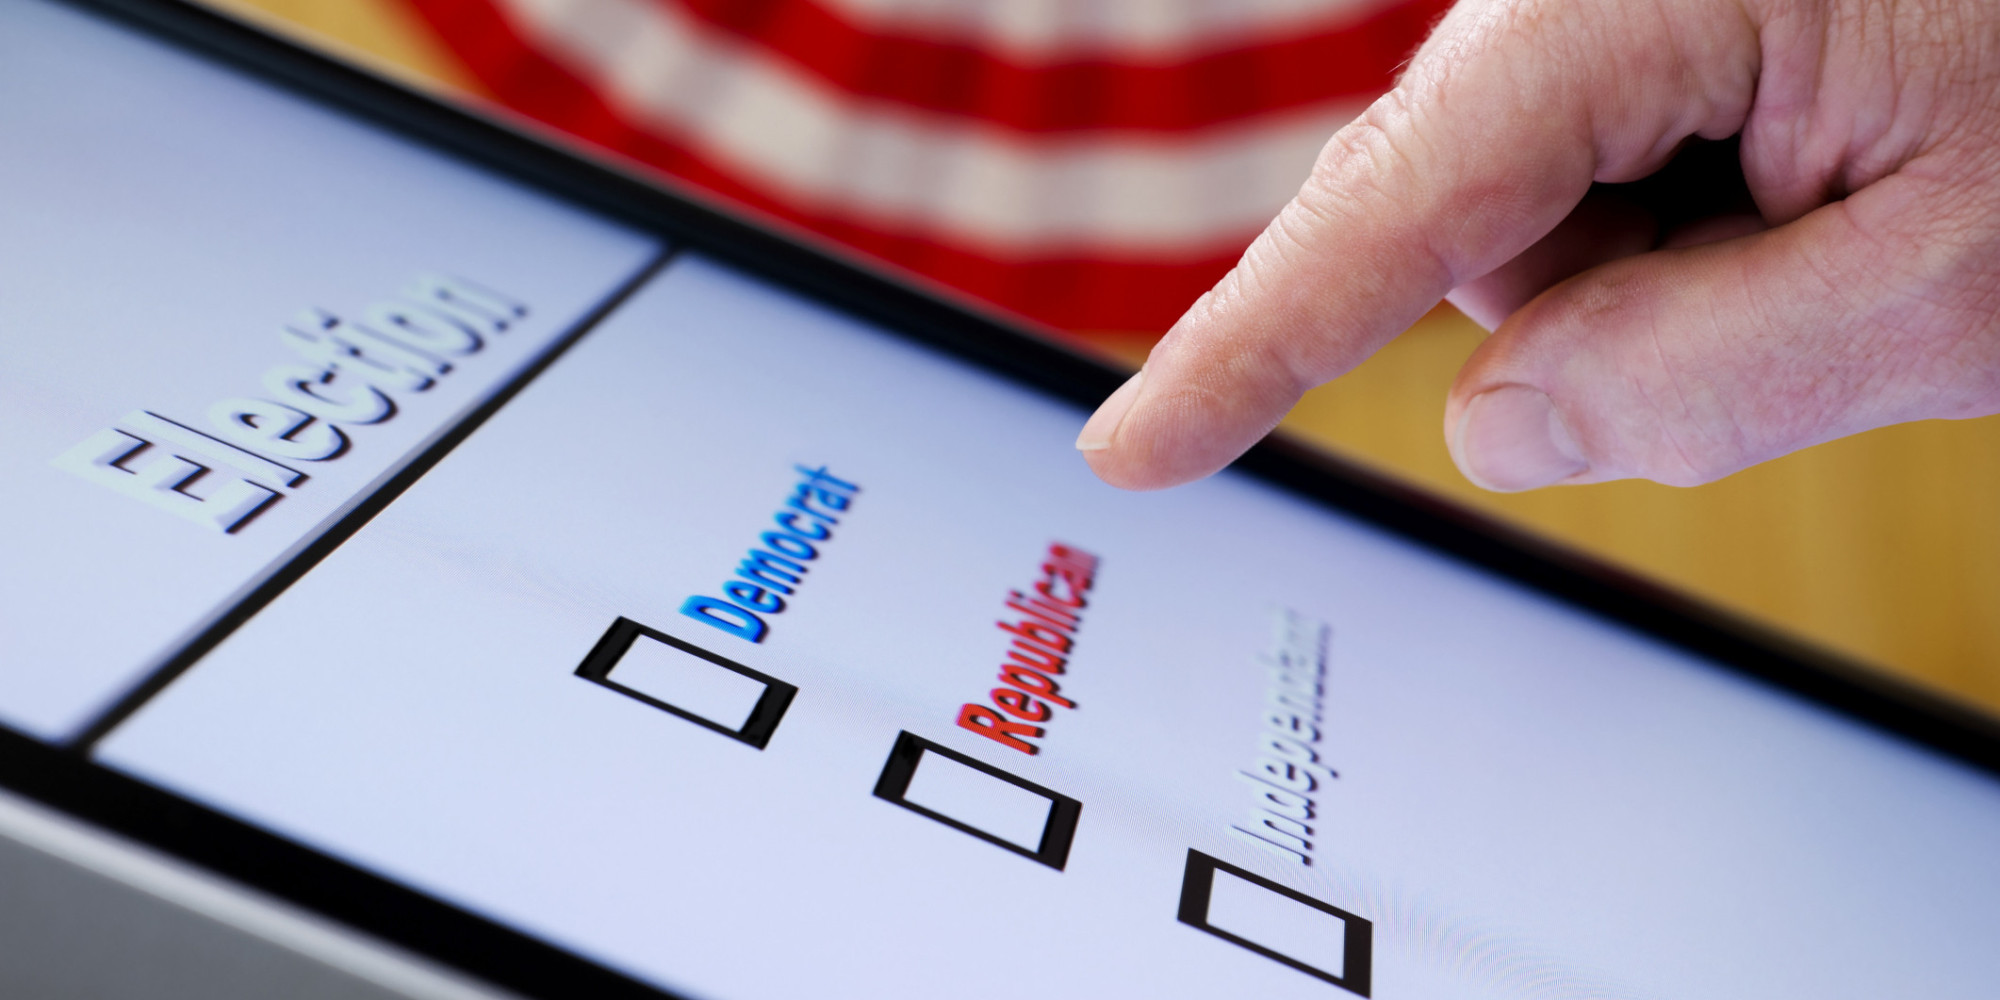 THE IMPACT OF INFORMATION TECHNOLOGY IN  POLITICAL CAMPAIGNING— HOW EFFECTIVE IS IN MOBILIZING  VOTERS AND NEW WAYS TO IMPROVE THE VOTE SHARE  FOR THE  POLITICAL PARTIES AND CANDIDATES USING IT.